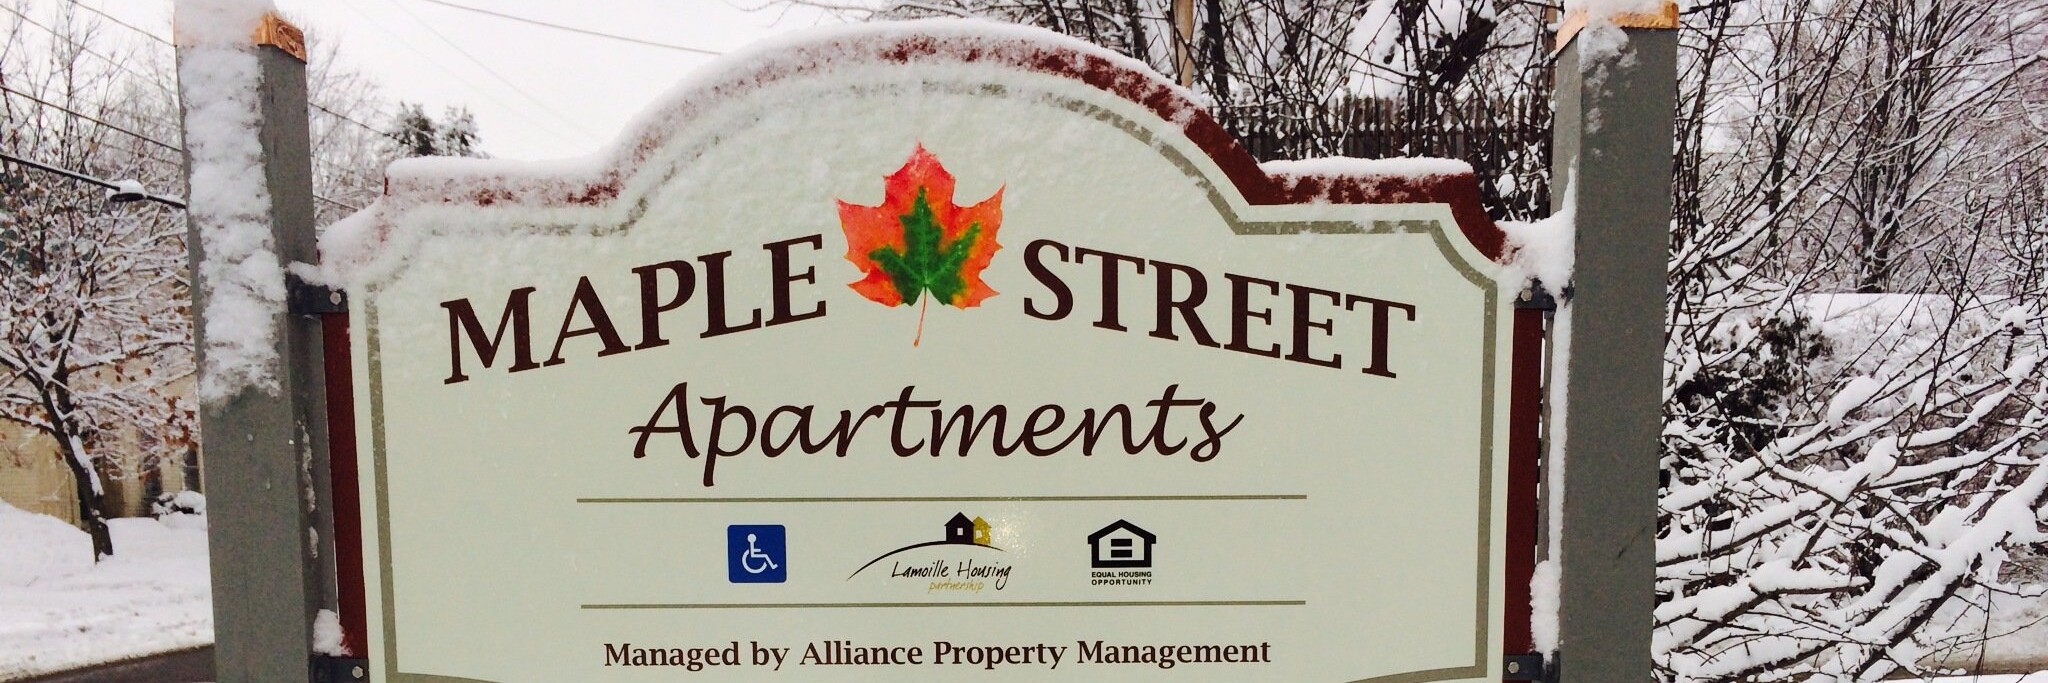 maple street apartments sign